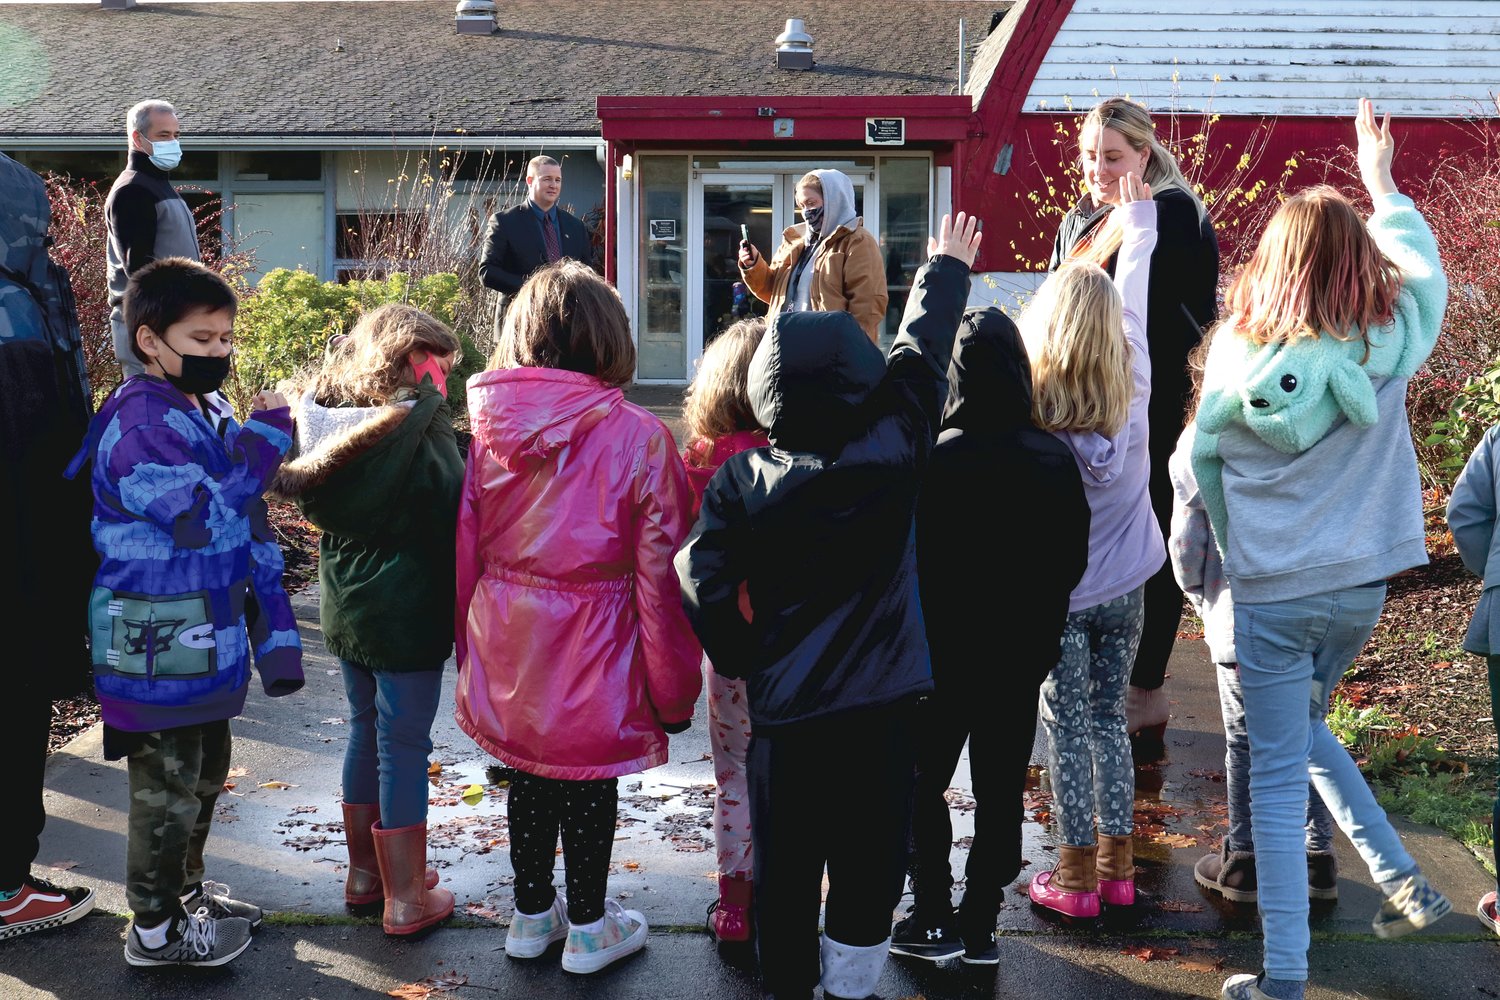 Oakville Elementary students, mediated by Oakville Elementary School Principal Jessica Swift, ask questions about the school district’s plans to demolish and reconstruct the elementary school at a groundbreaking ceremony held outside the elementary school on Monday.